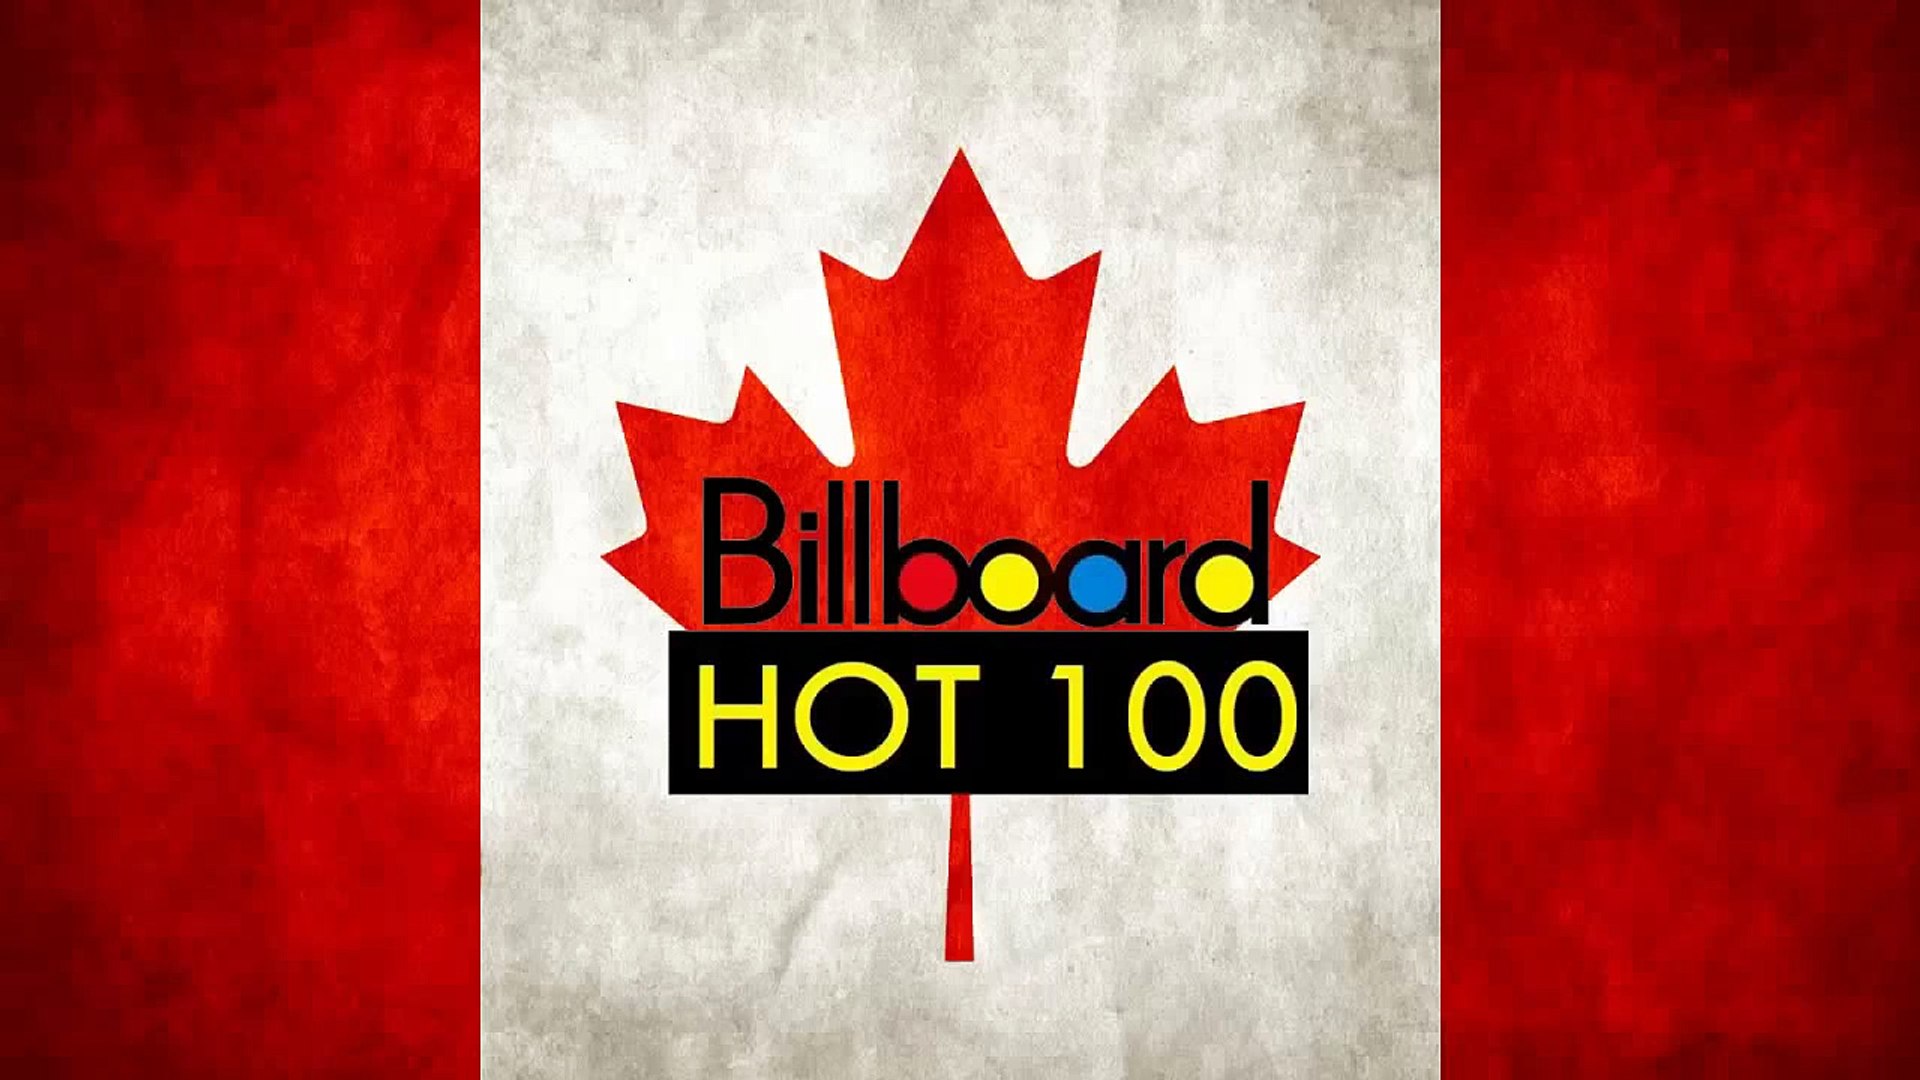 Canada Top 5 Songs of The Week March 08 2014 Billboard Hot 100